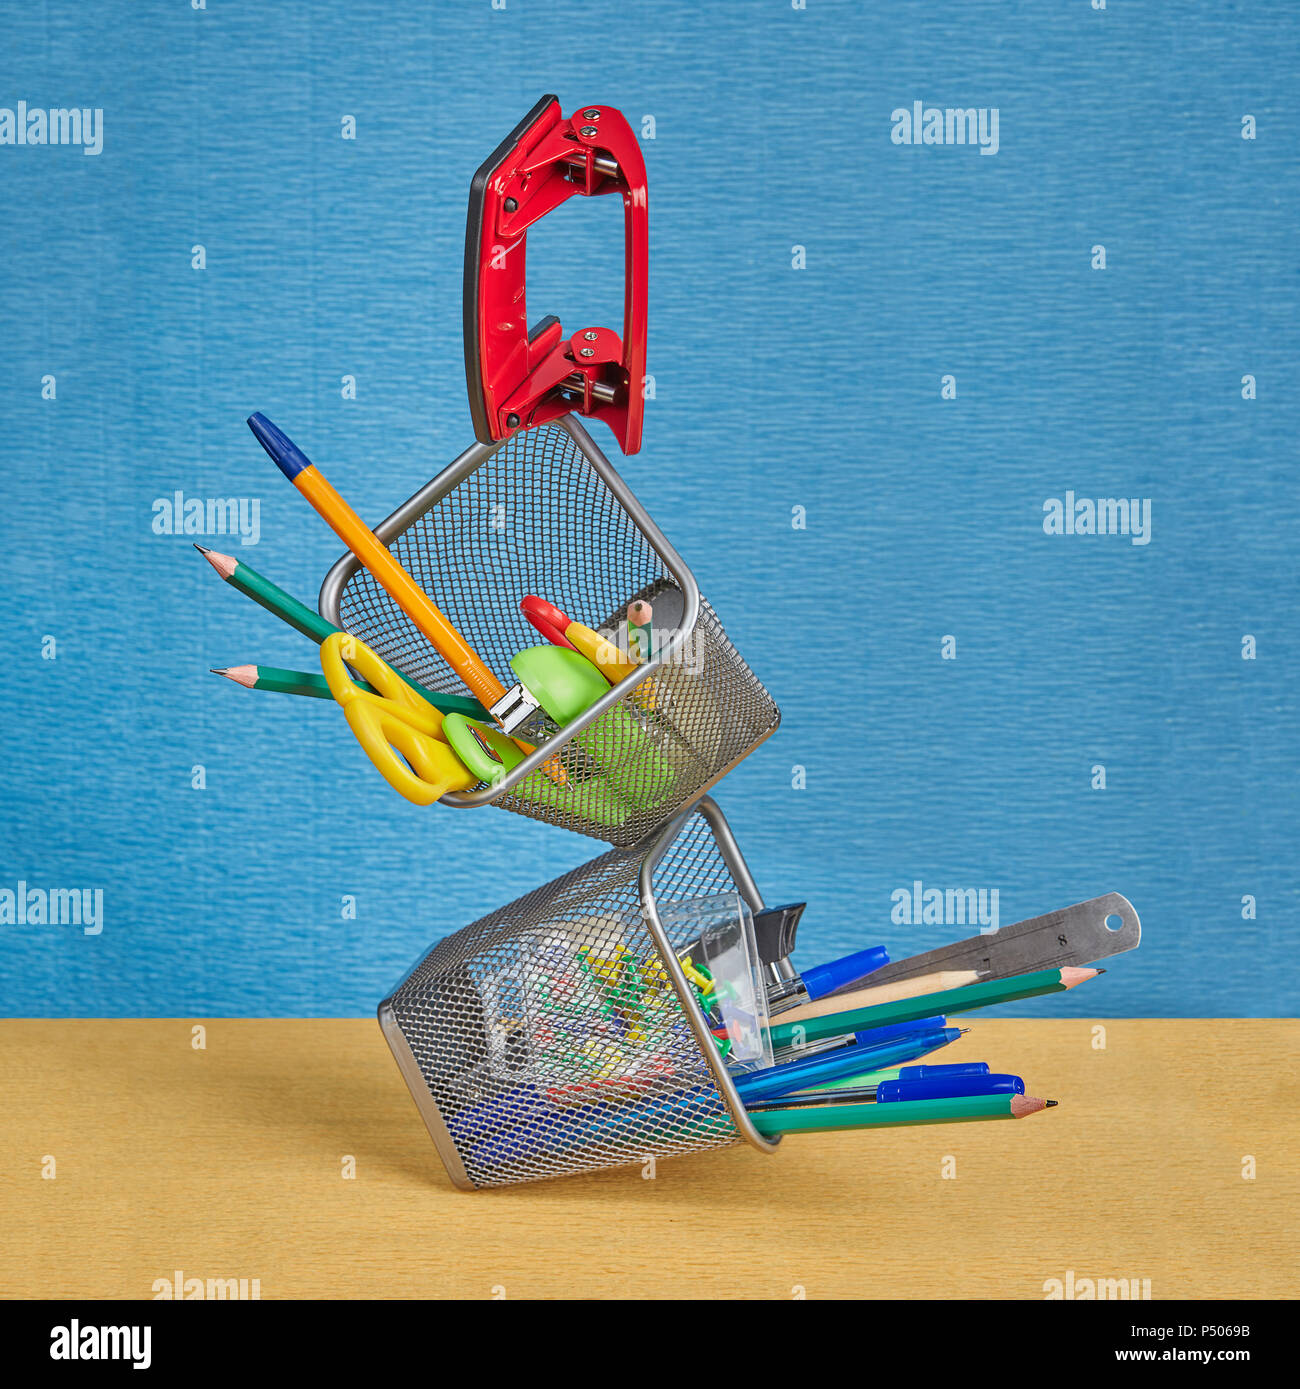 Two desktop stands for school supplies are filled with stationery in a zero-gravity environment. Stock Photo